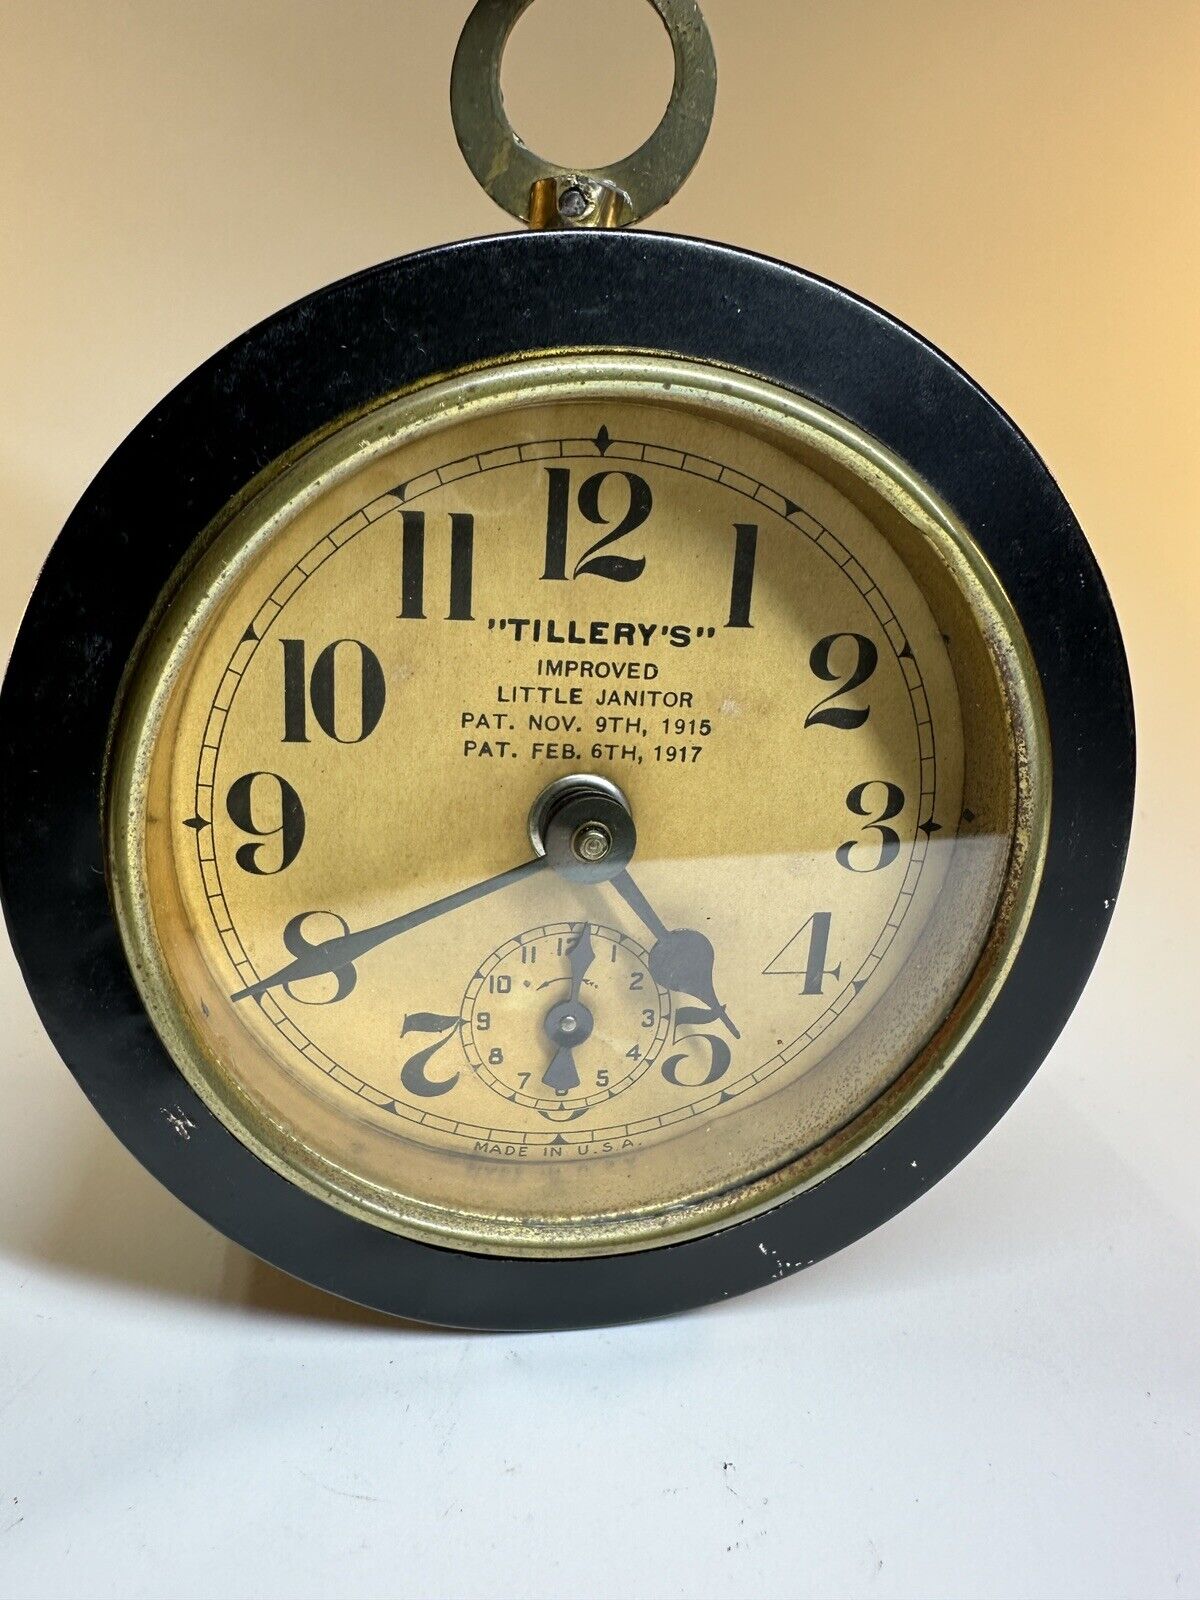 ANTIQUE Tillery’s Improved Little Giant ALARM CLOCK - NOT TICKING Made In USA